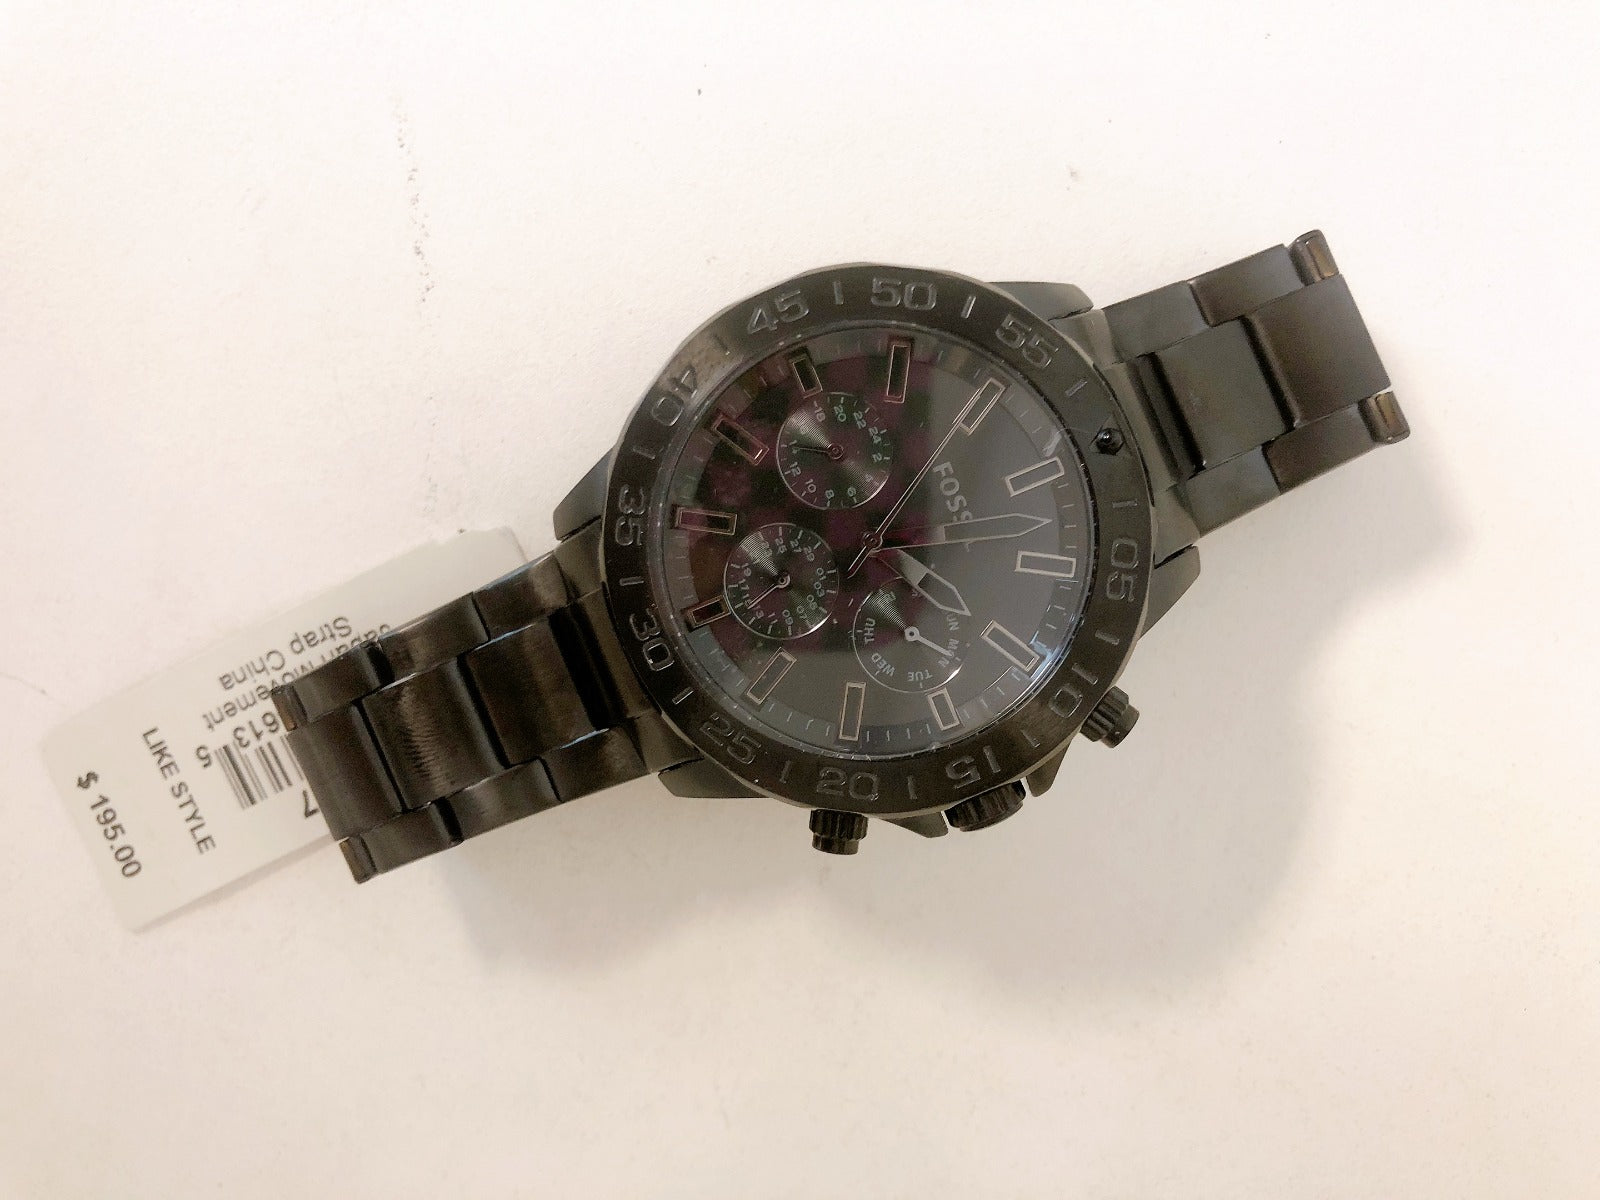 Fossil BQ2587 Bannon Multifunction Black Tone Stainless Steel Watch